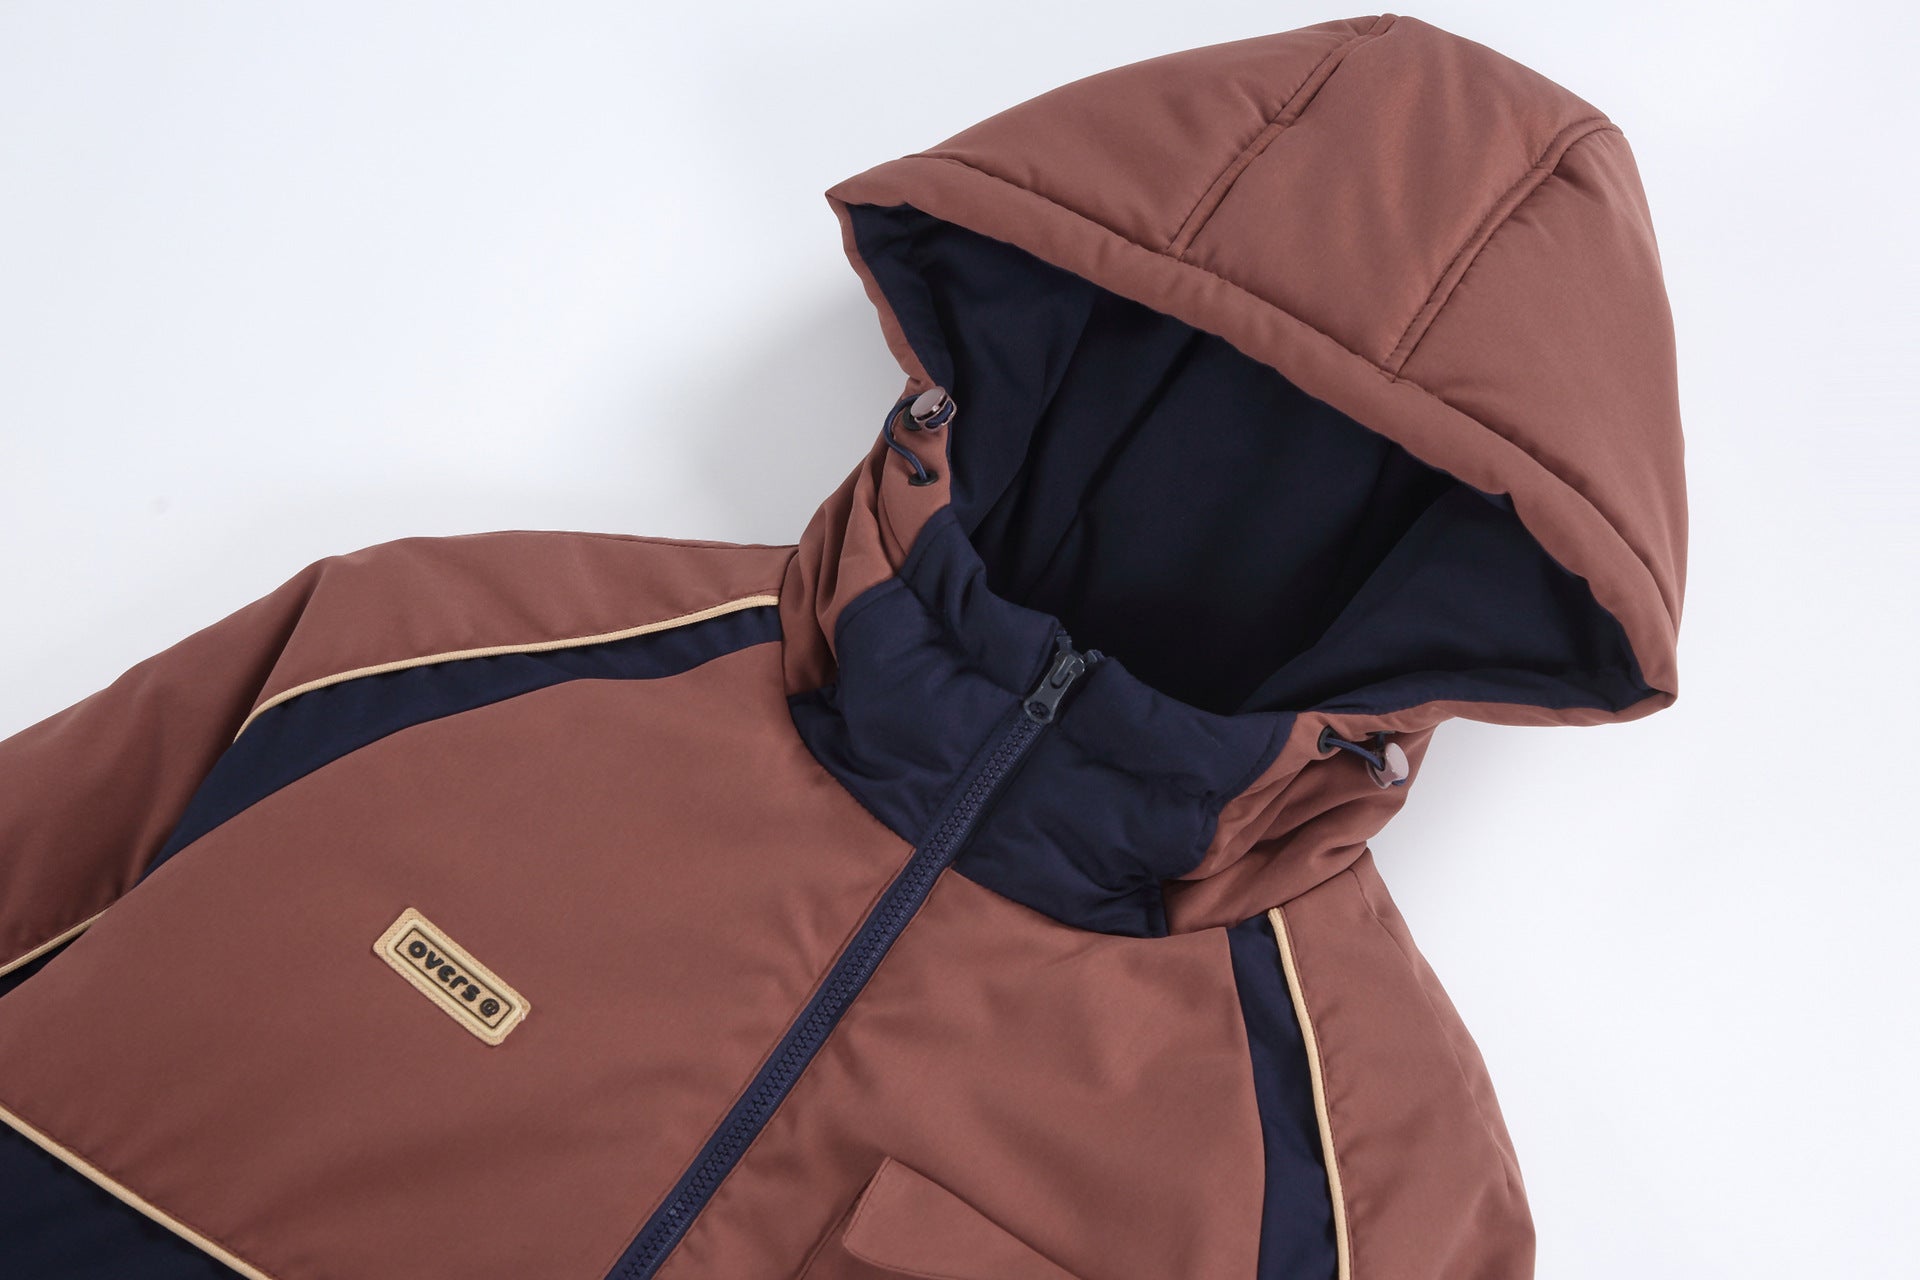 Winter new casual jacket